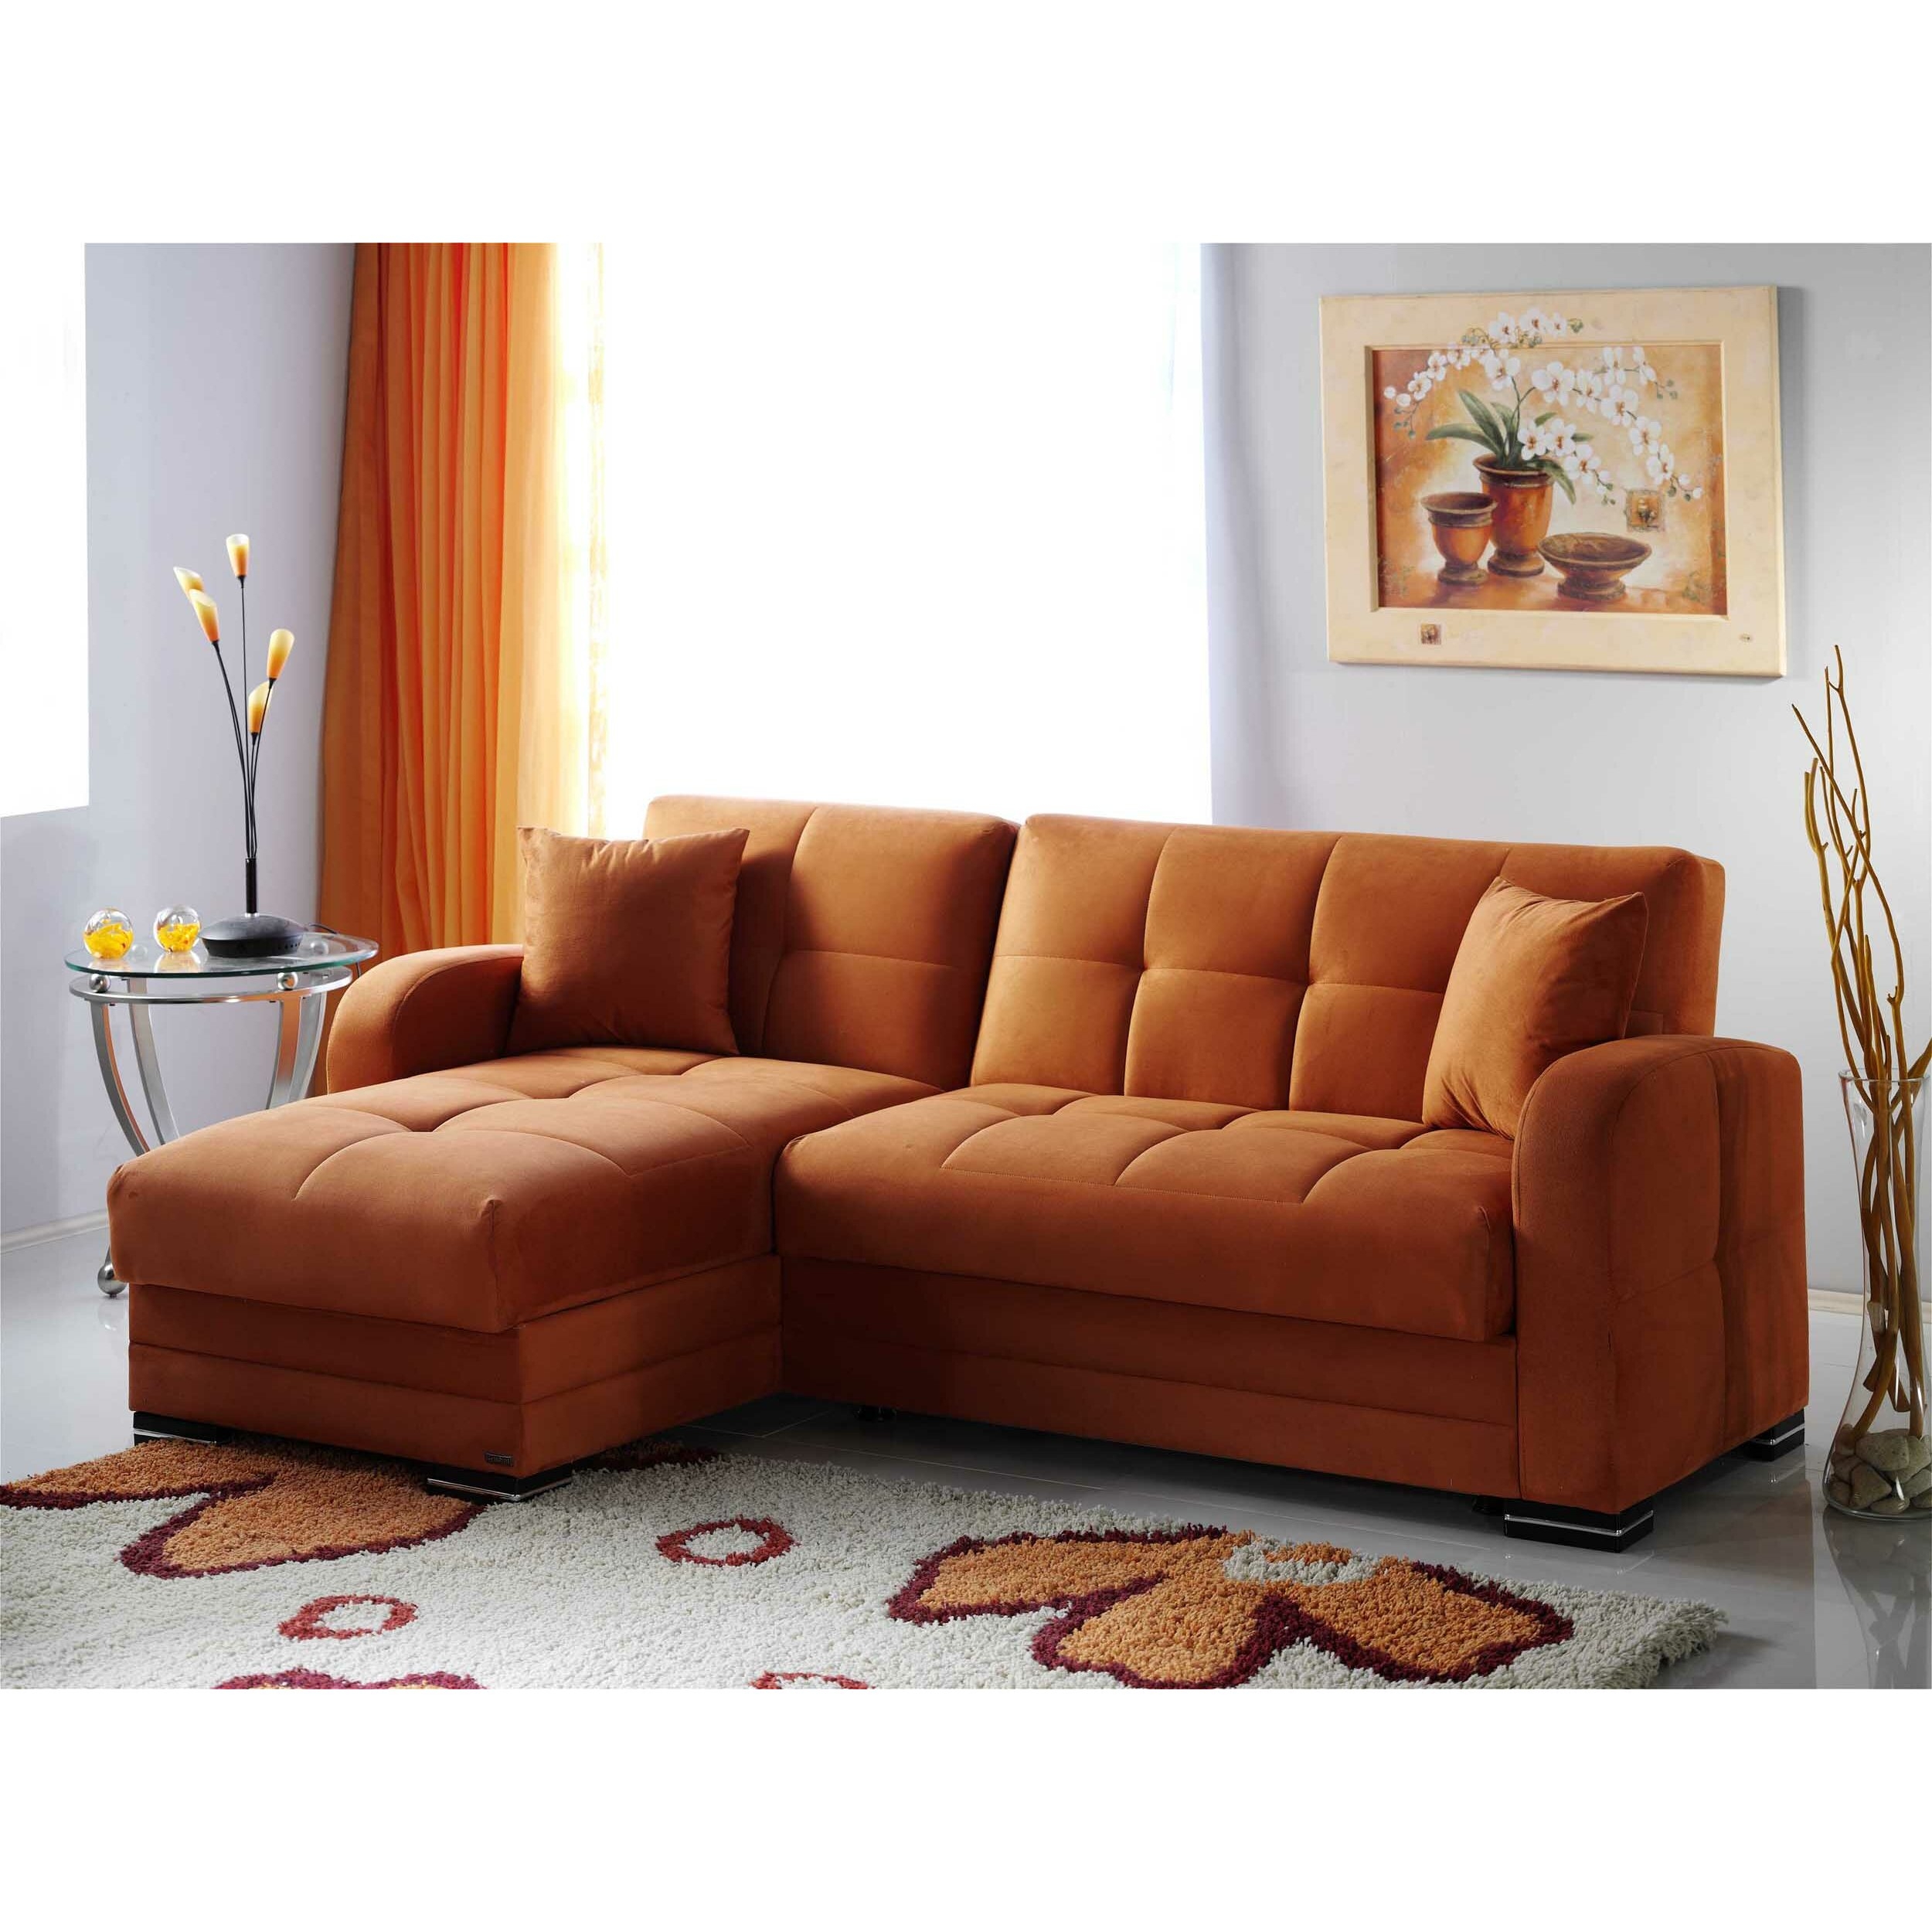 Image detail for small sectional sofa for small living rooms